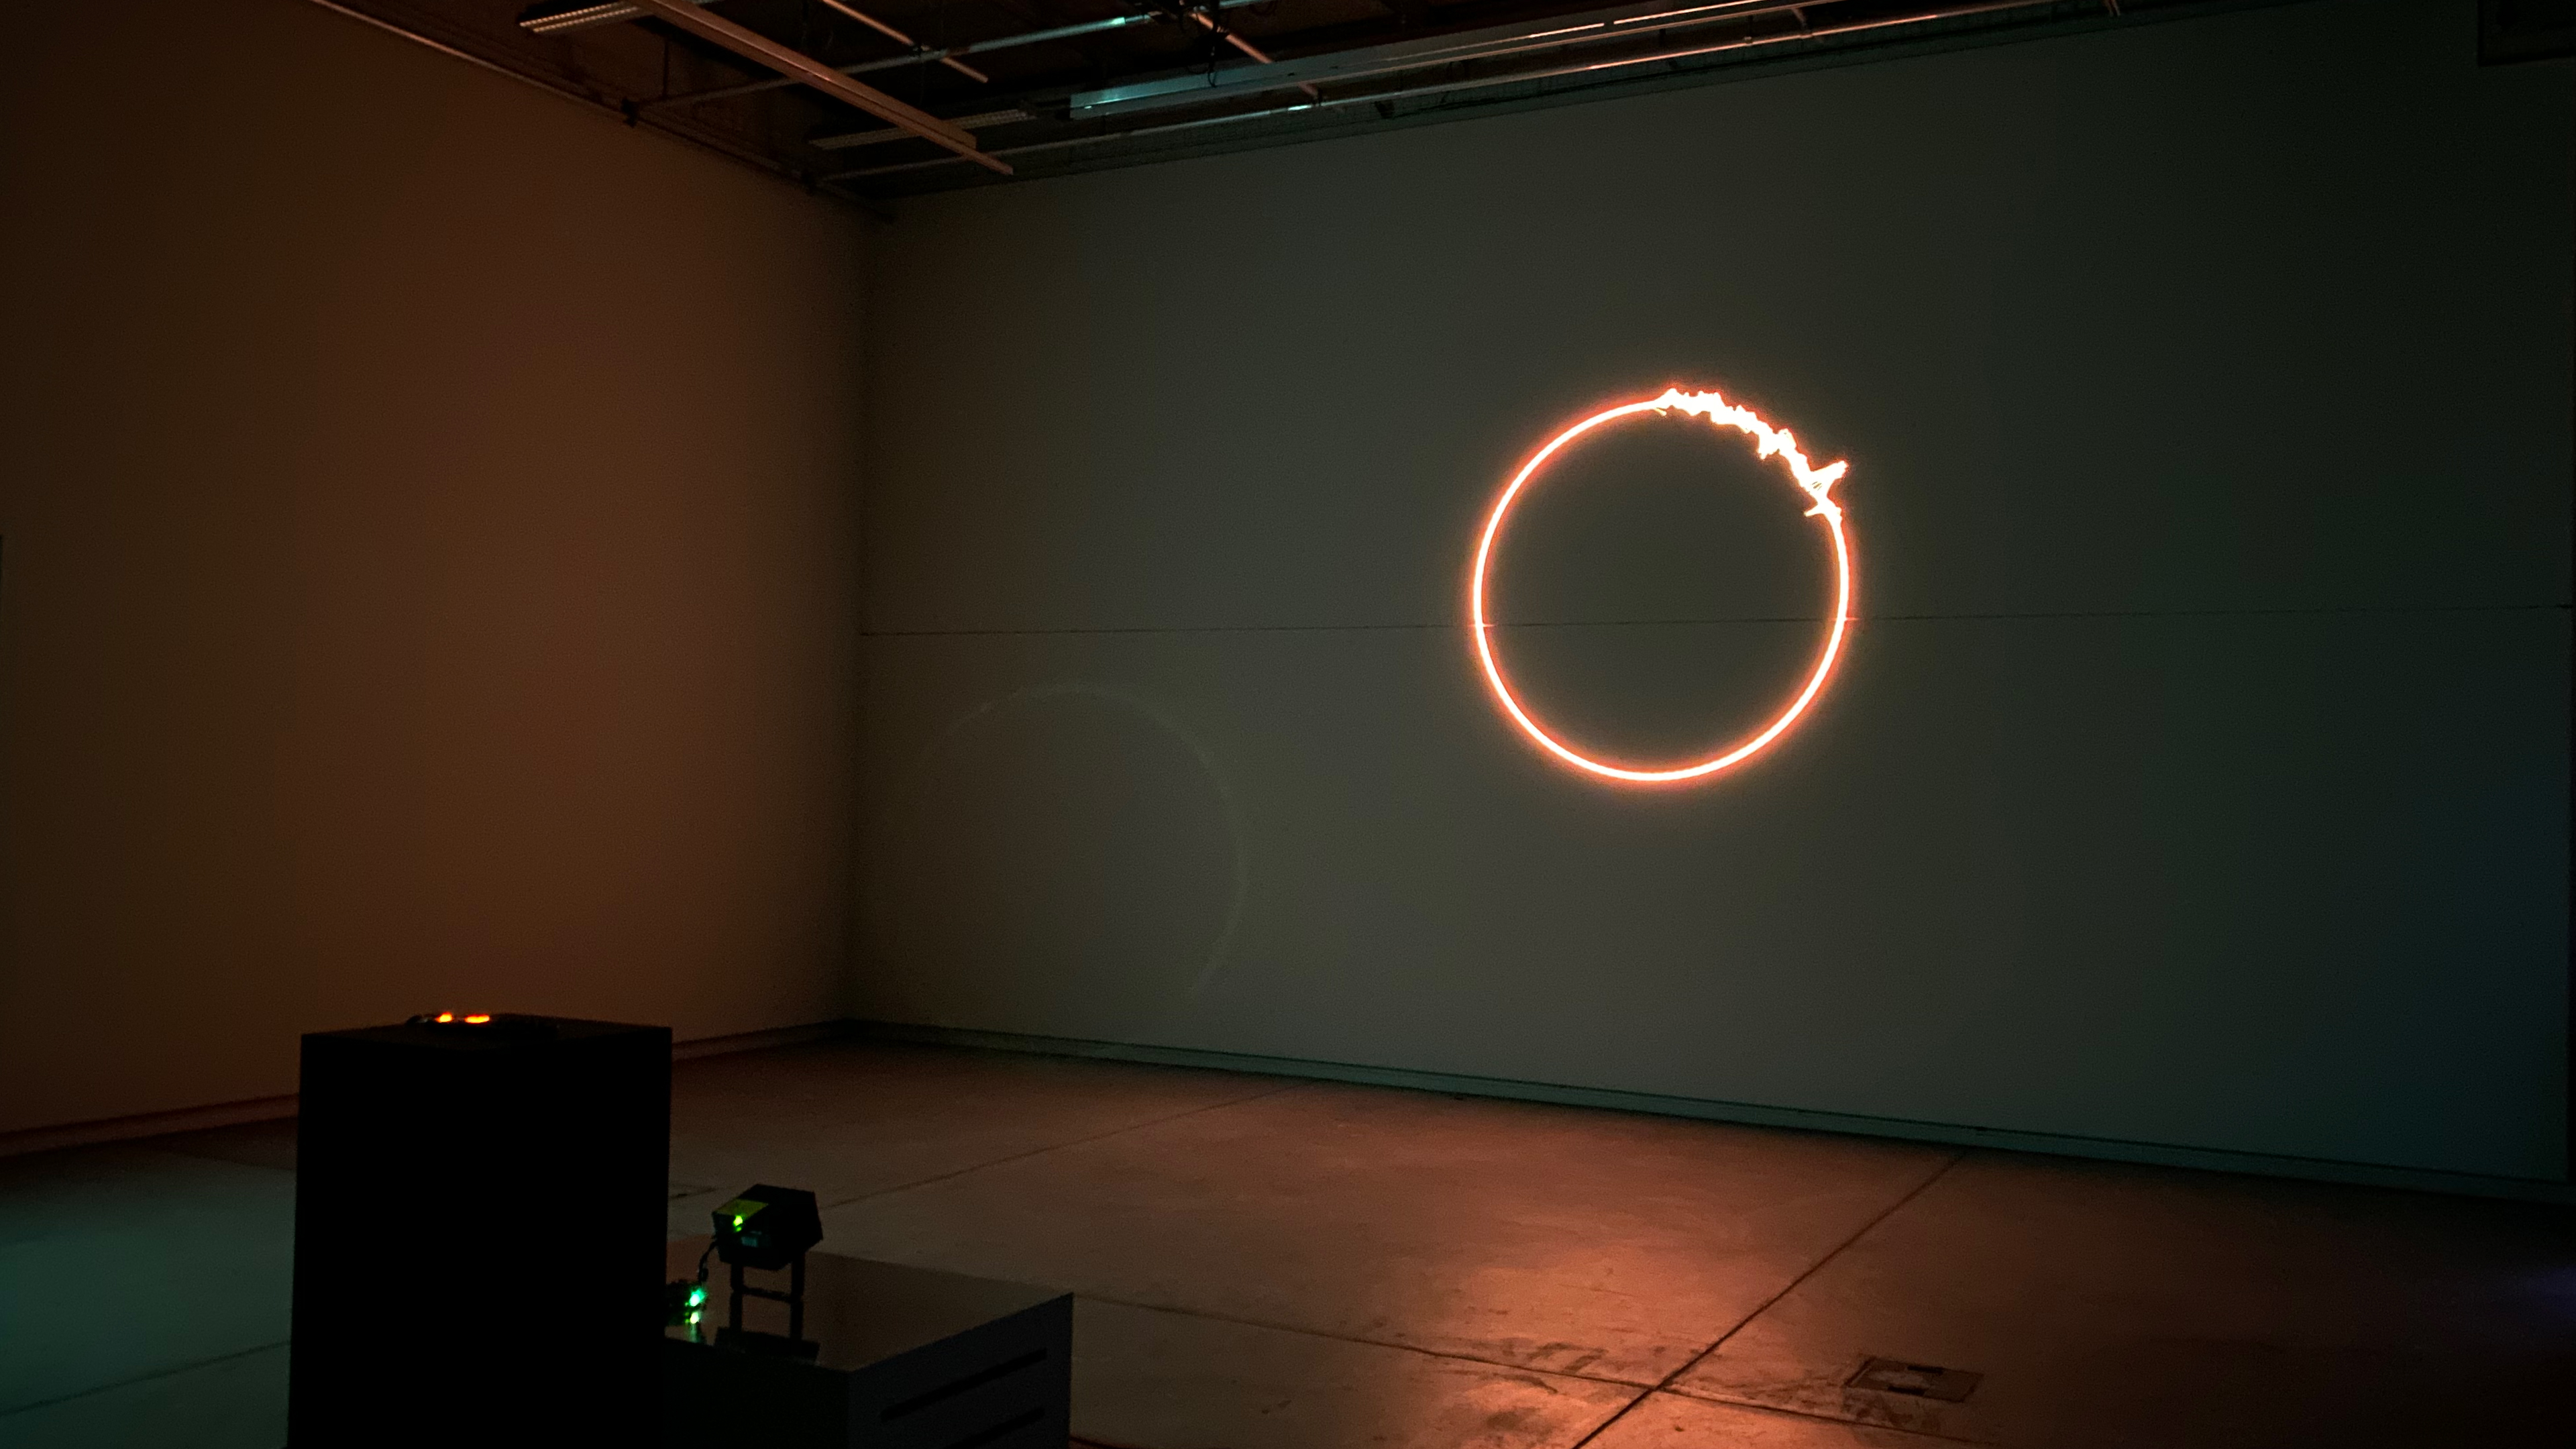 A laser projection onto a wall in a dark room. A red, disintegrating circle.